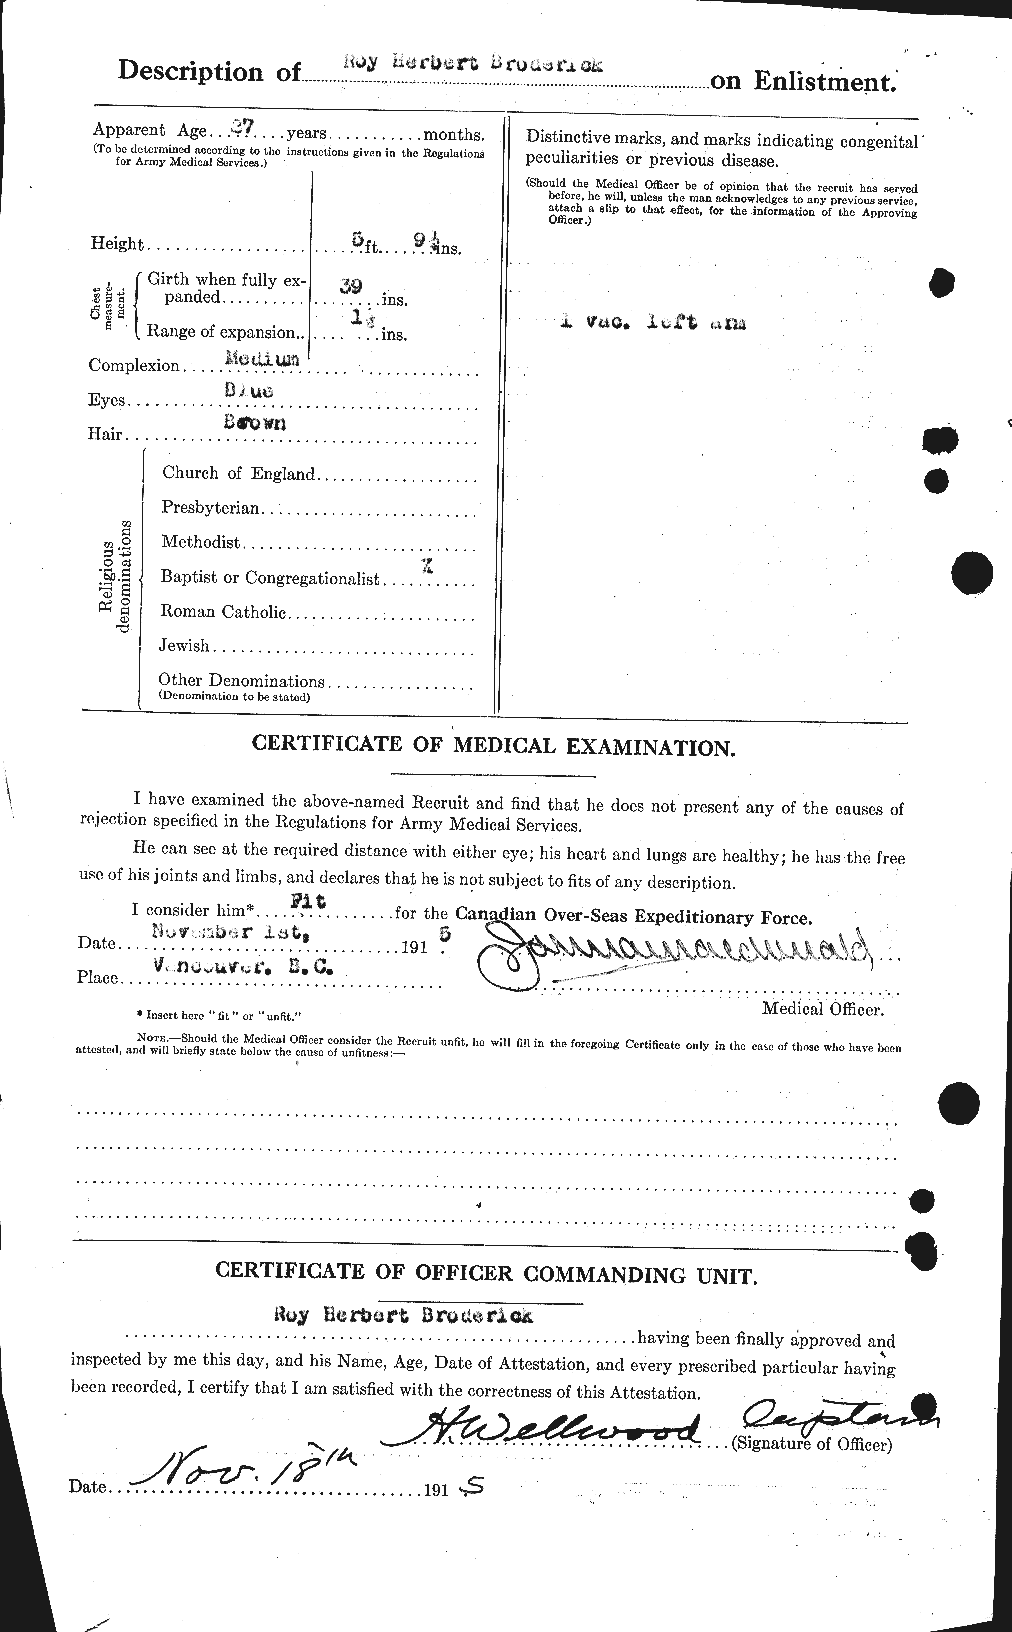 Personnel Records of the First World War - CEF 260992b